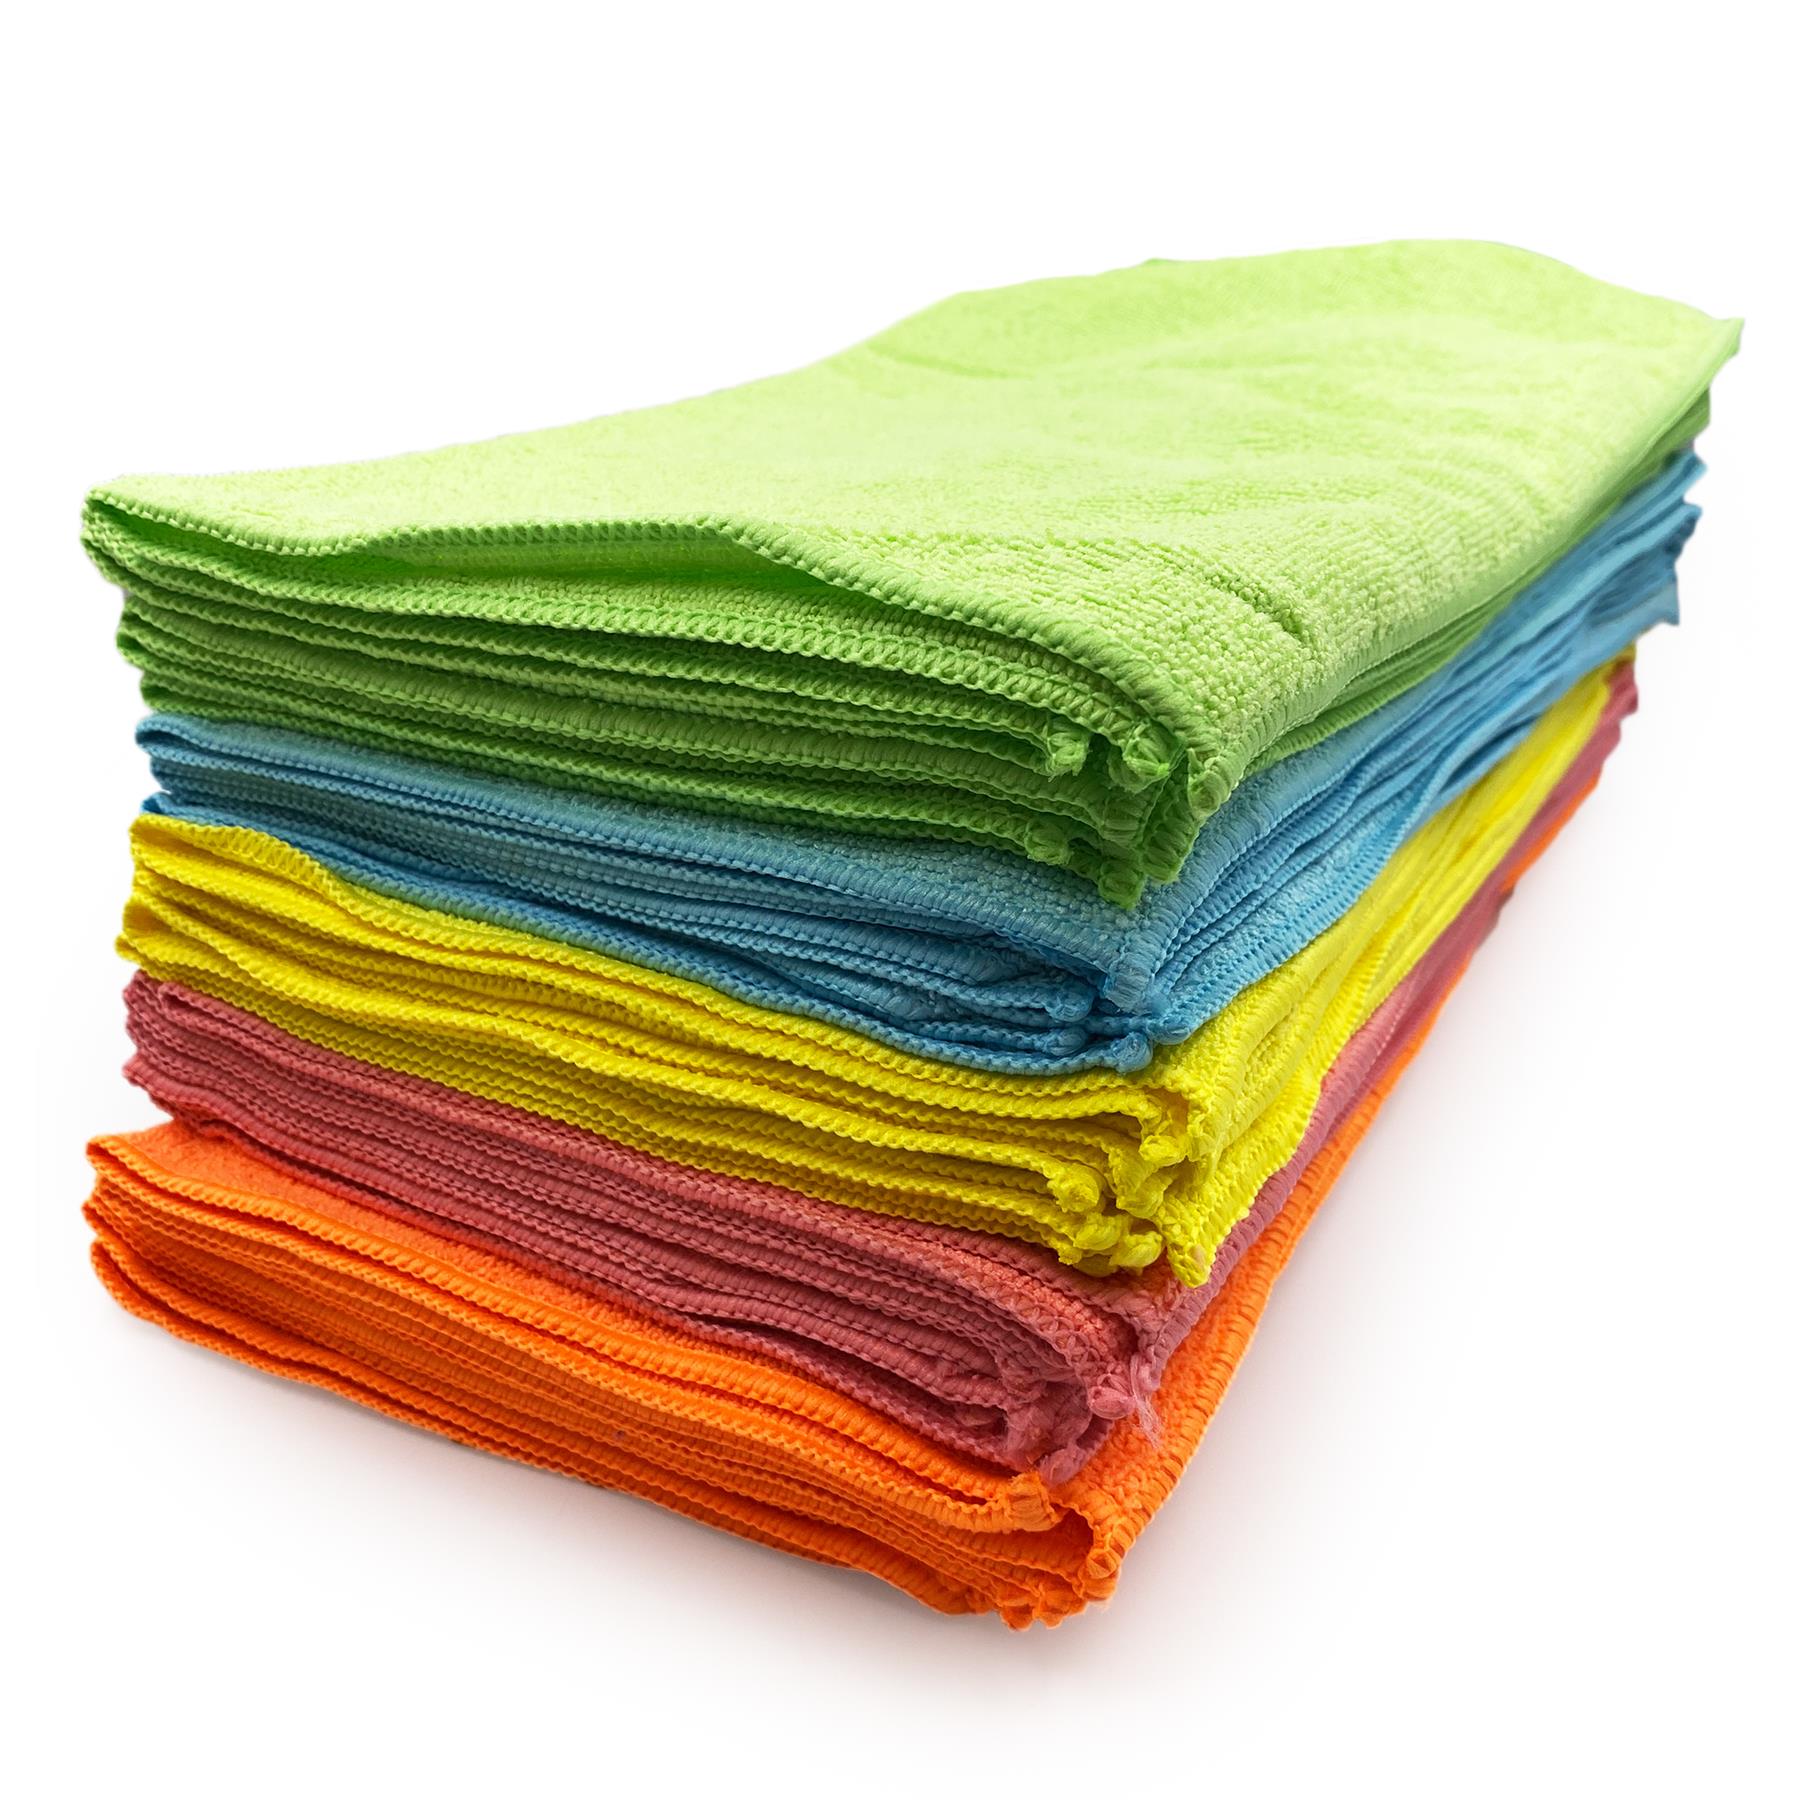 Pack of 40 Microfibre Cloths - CLEARANCE